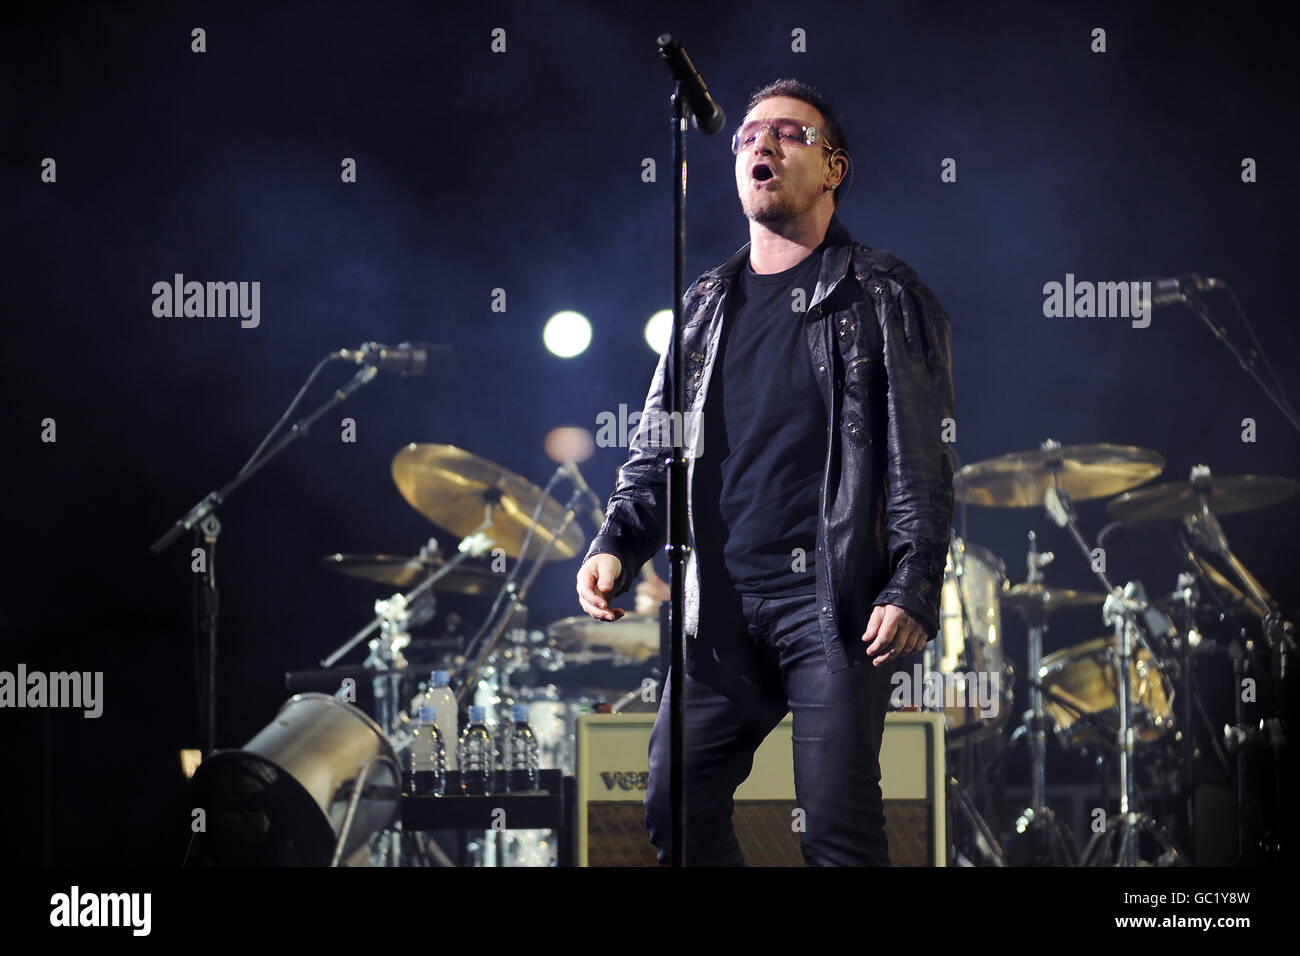 Bono of U2 performs live at the Don Valley Stadium in Sheffield as part of their 360 Degree Tour. Stock Photo